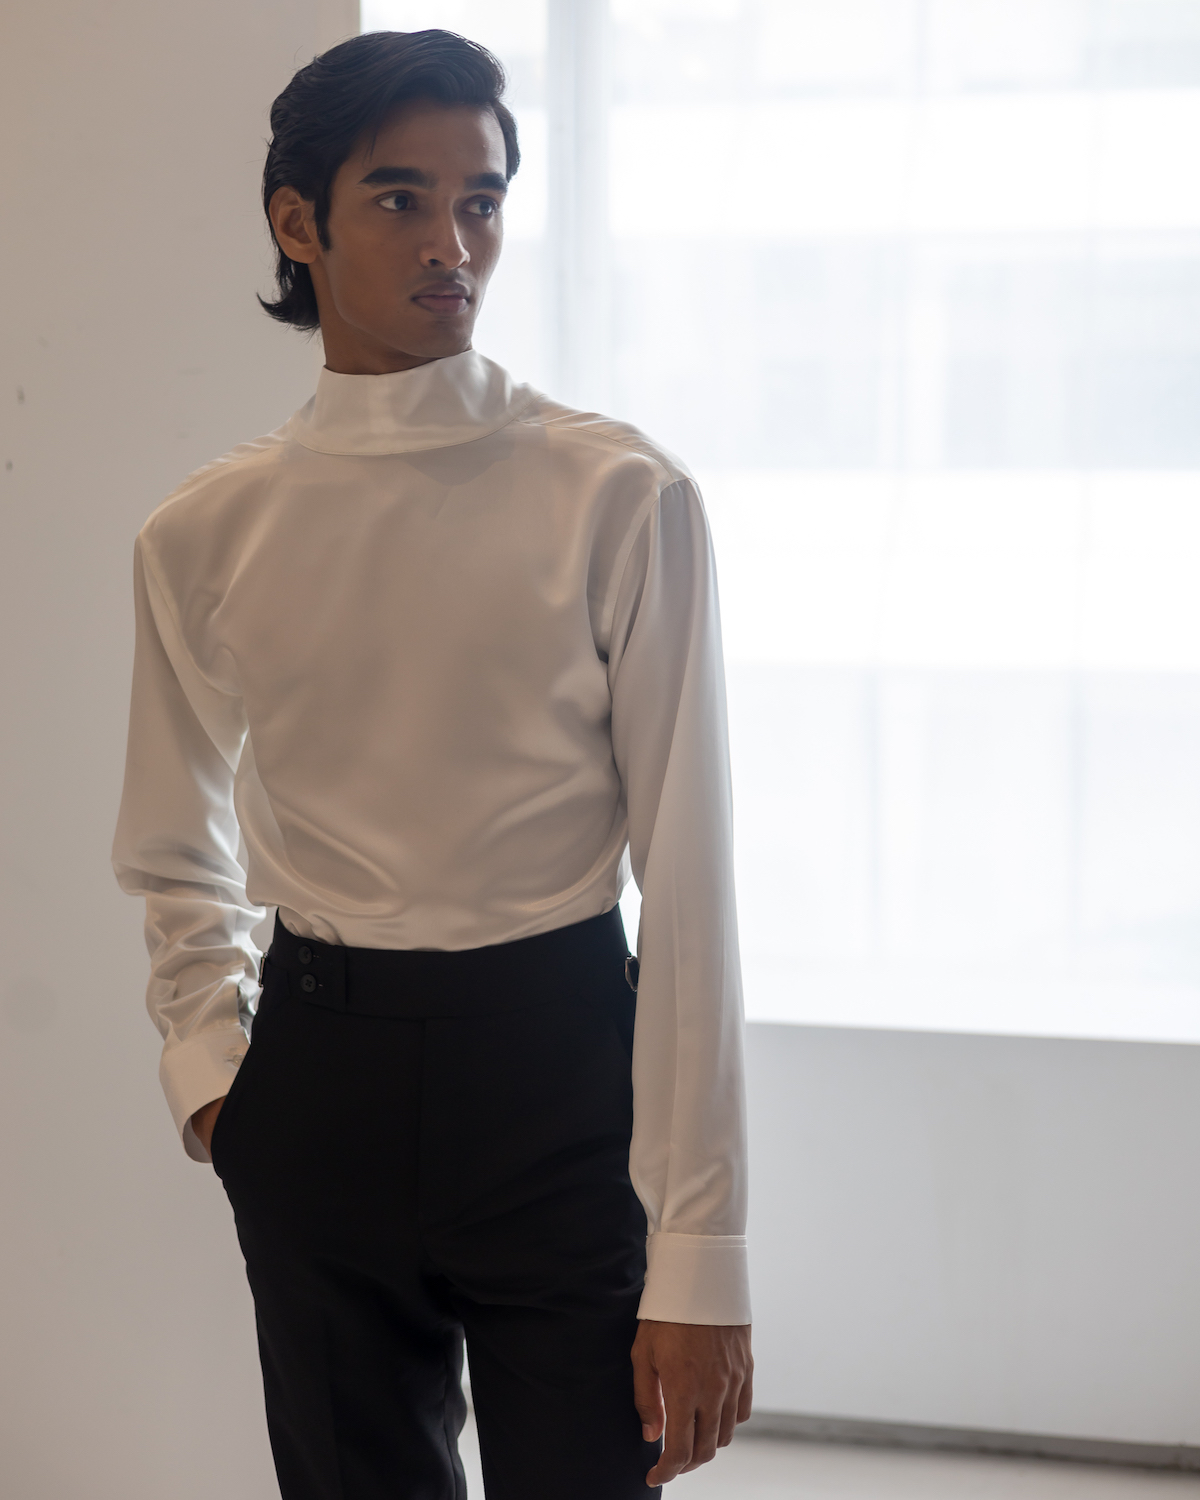 A model wearing a white long-sleeved turtleneck and black suit pants stands in a white showroom. The model is wearing clothes from B.M.C.